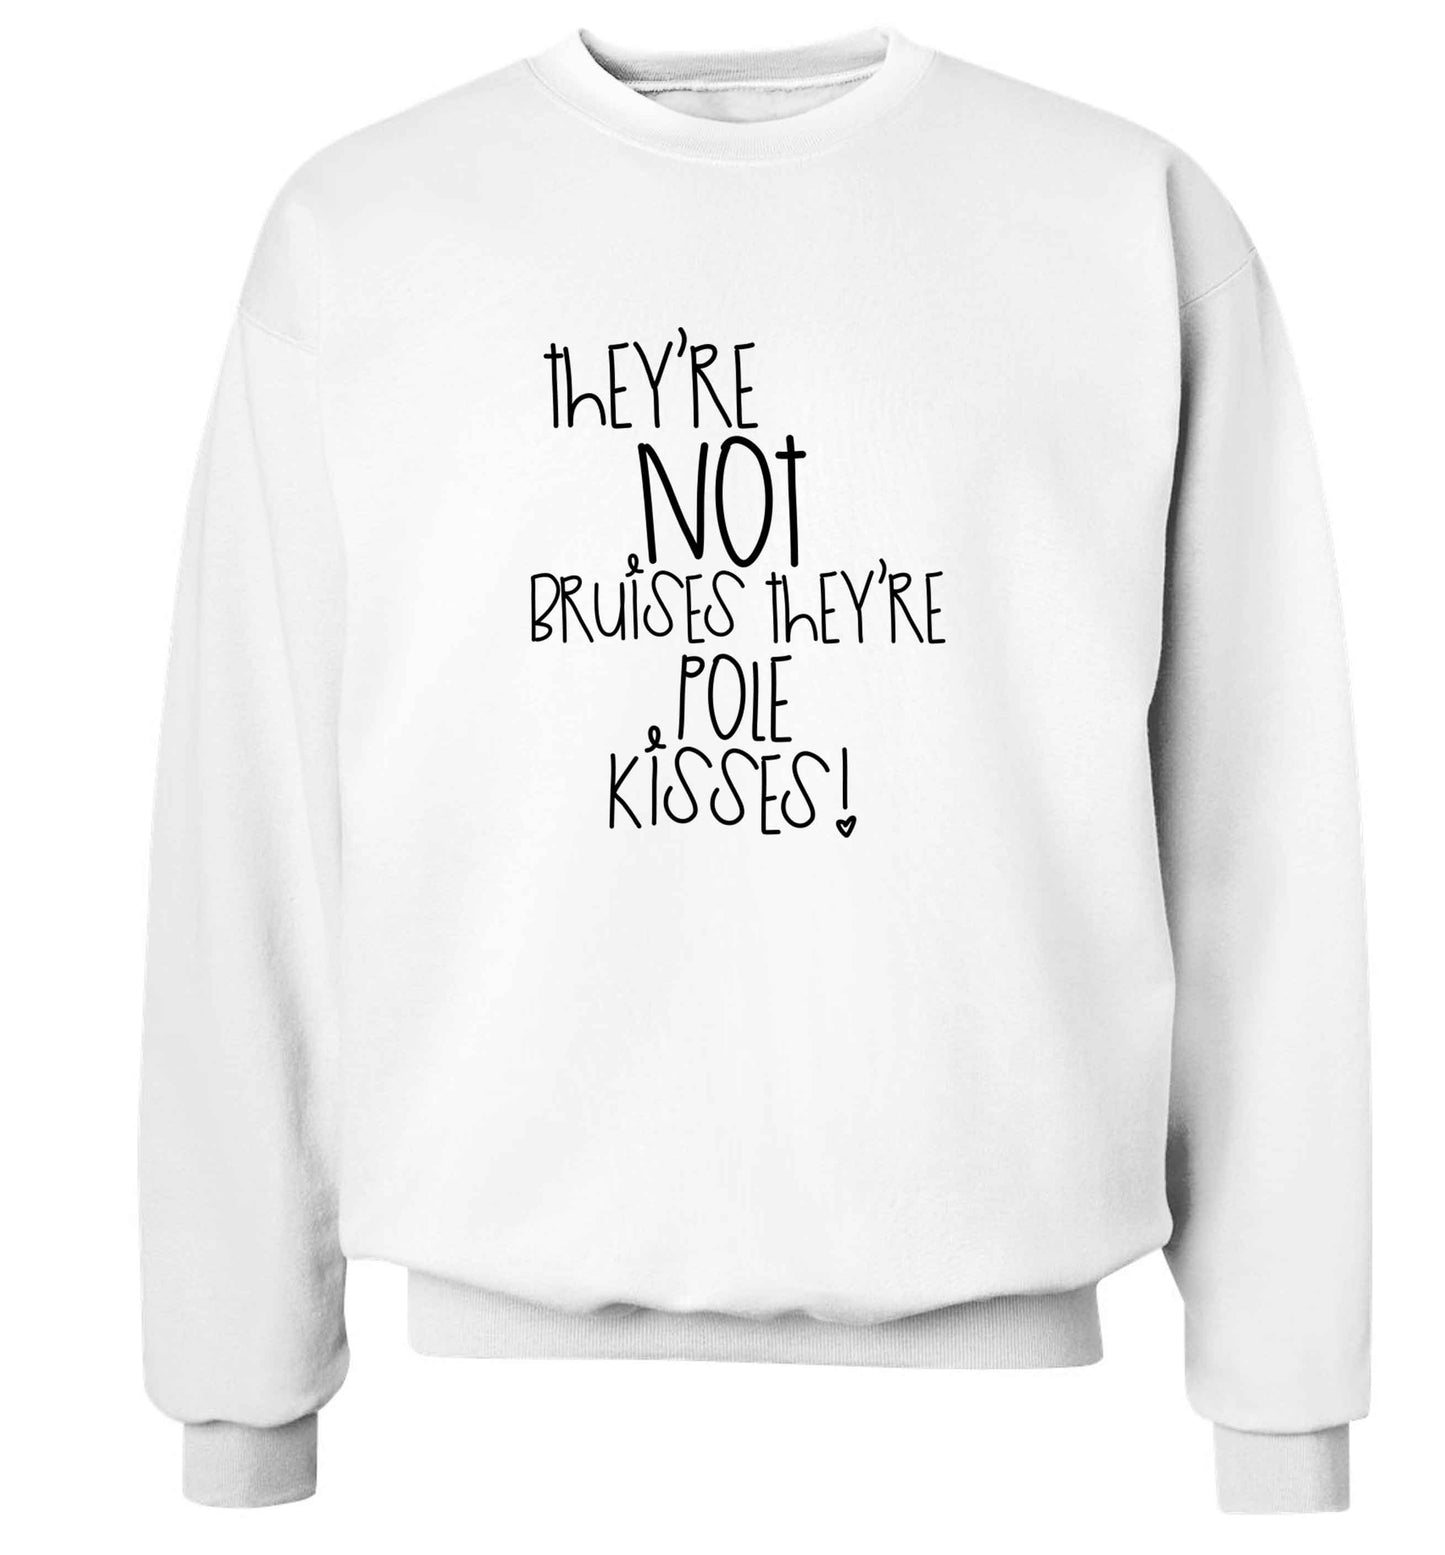 They're not bruises they're pole kisses adult's unisex white sweater 2XL